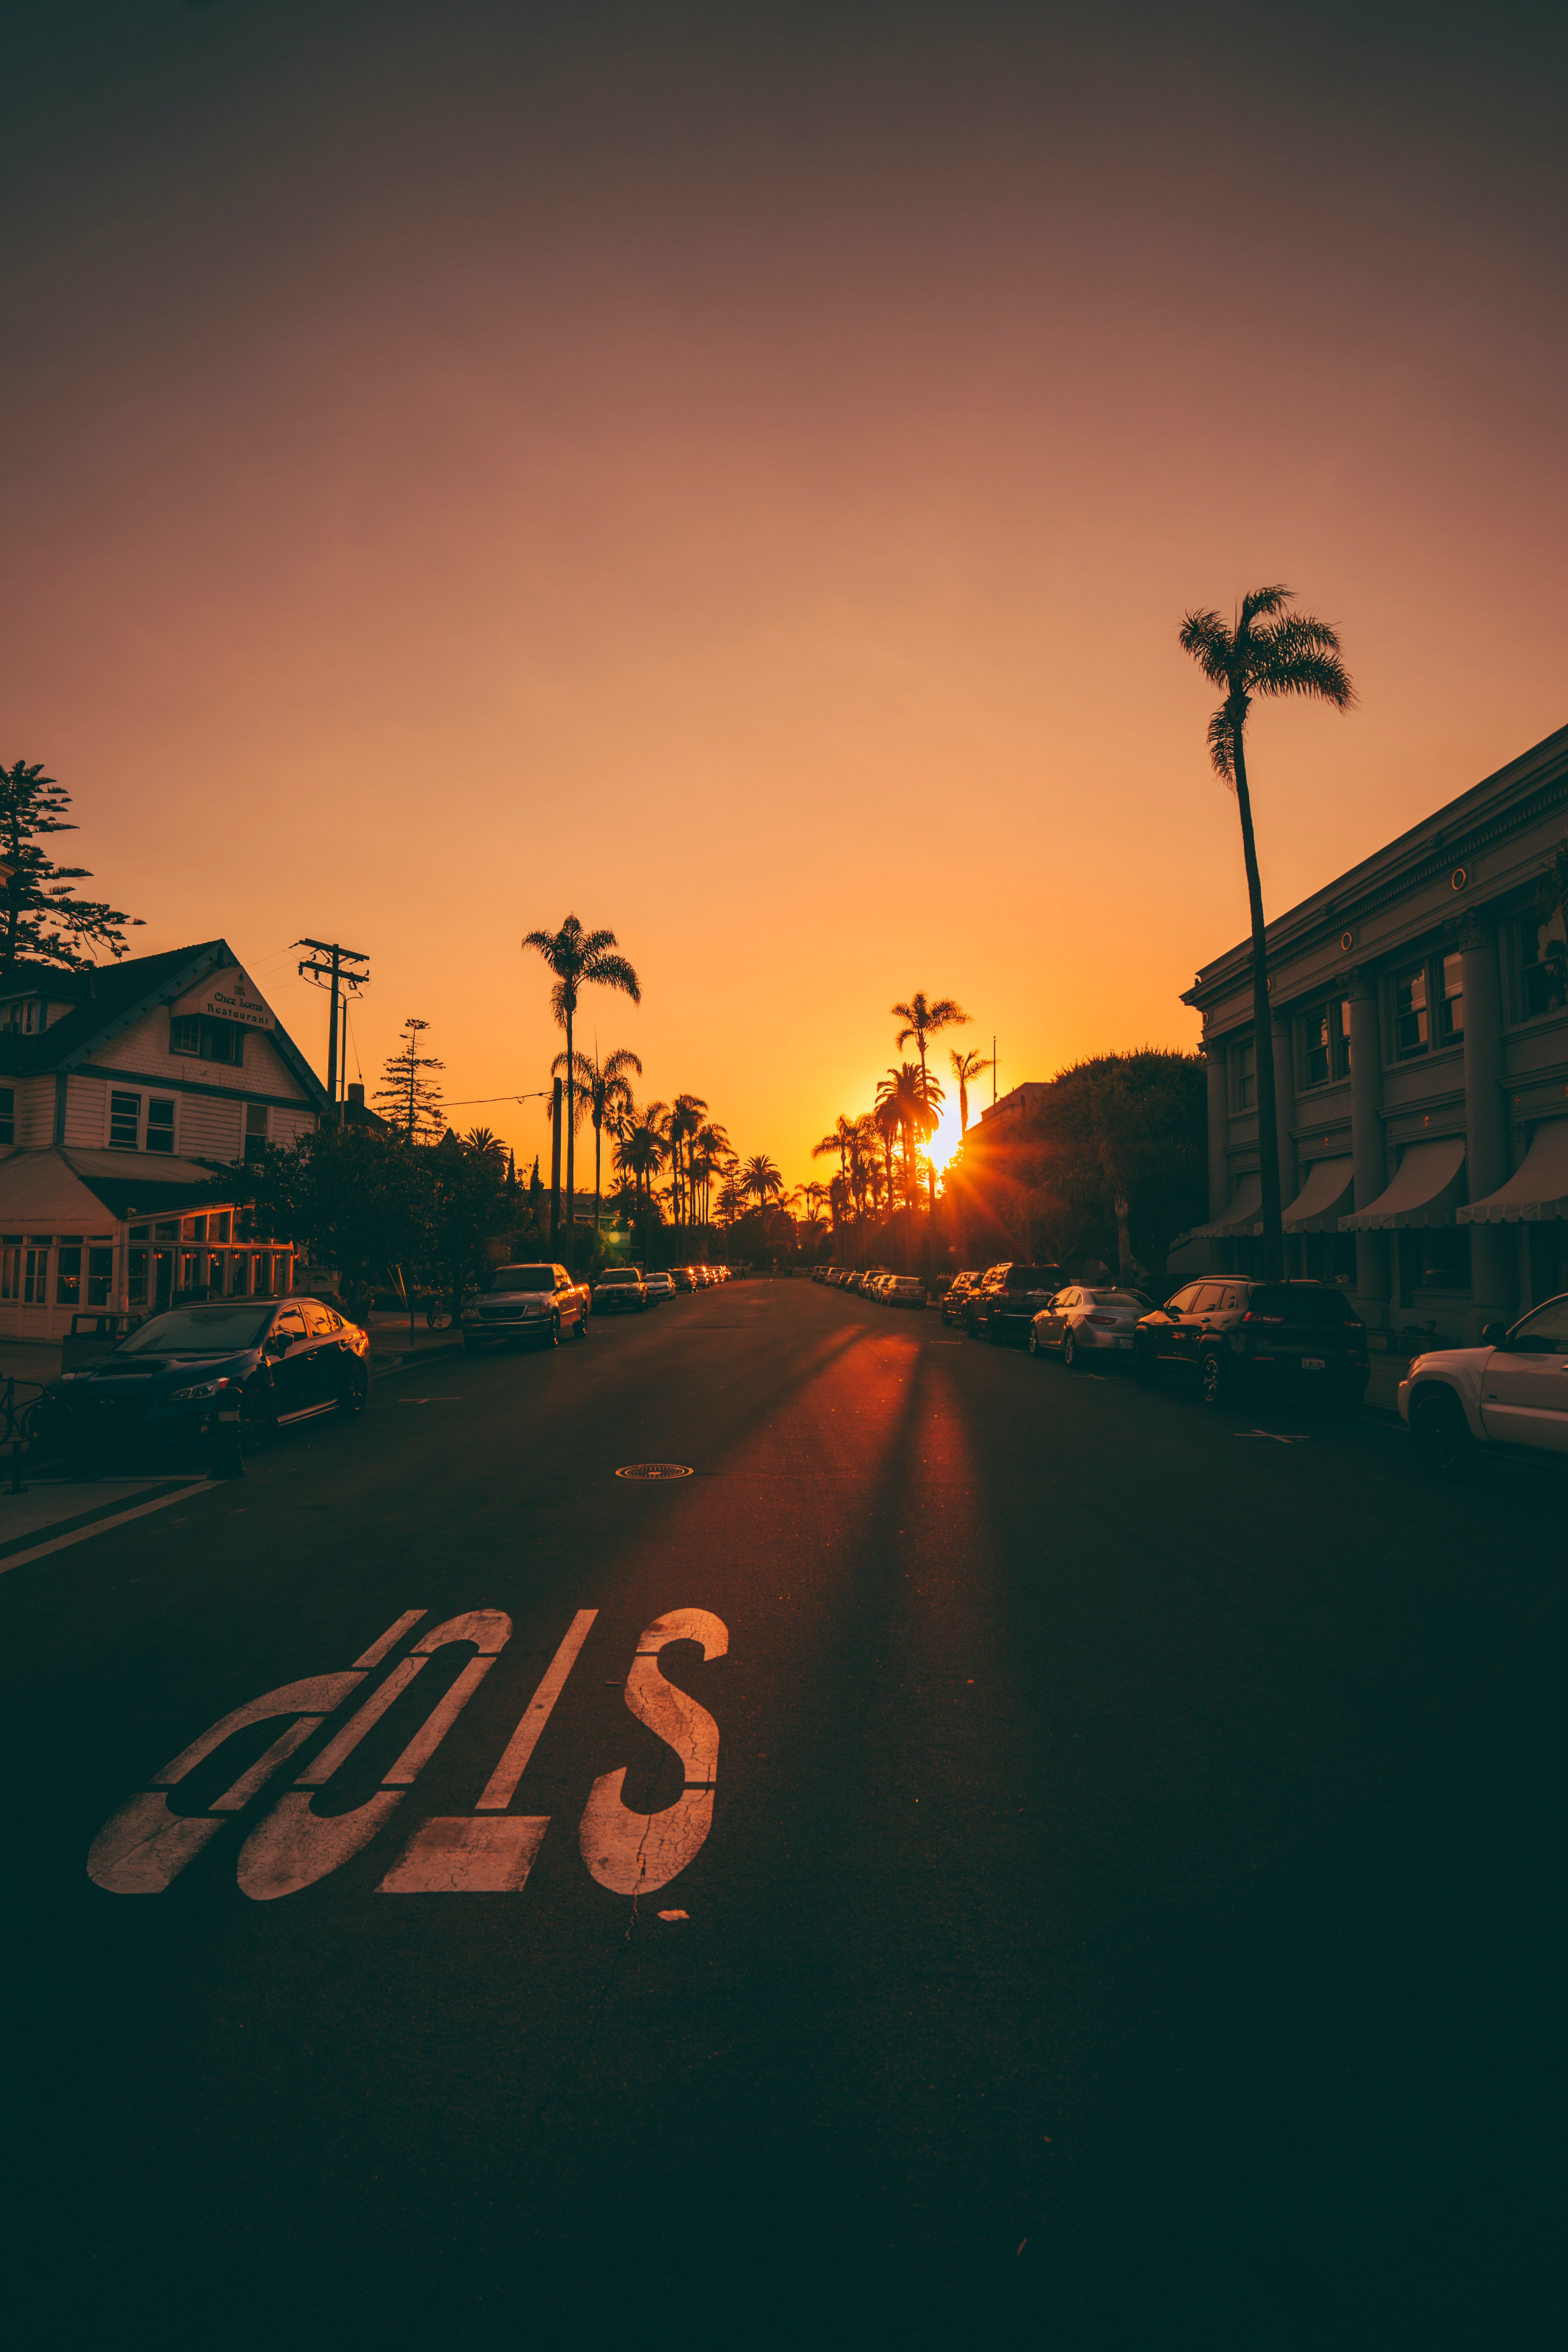 cars, cities, palms, road, street, sunset, markup